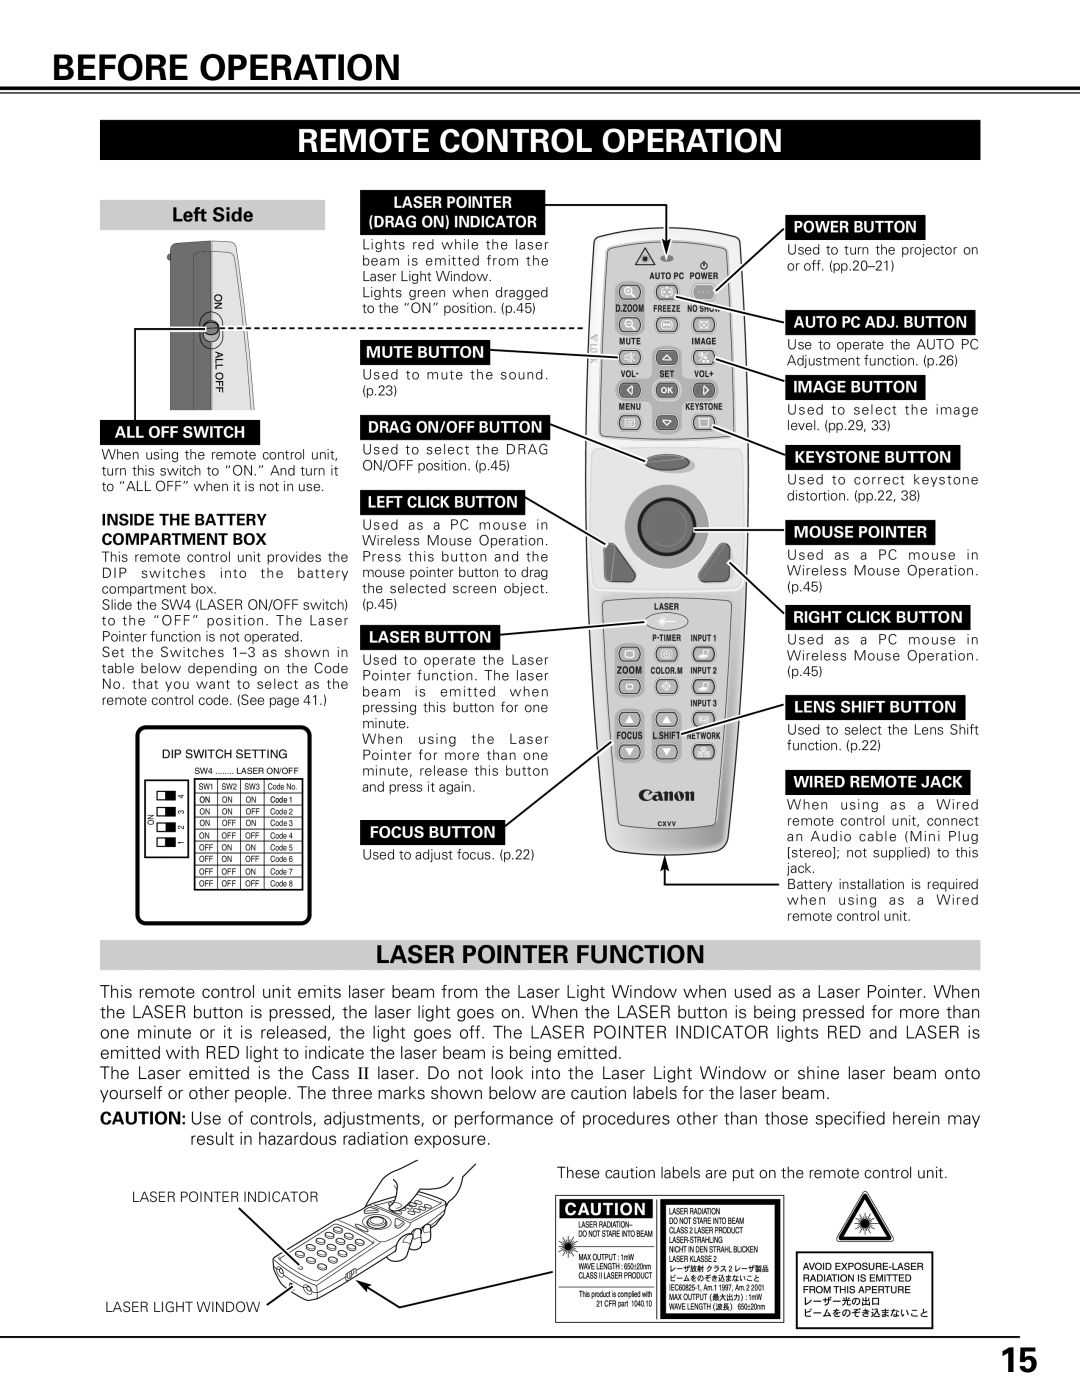 Canon LV-7575 user manual Before Operation, Remote Control Operation, Laser Pointer Function, Left Side 